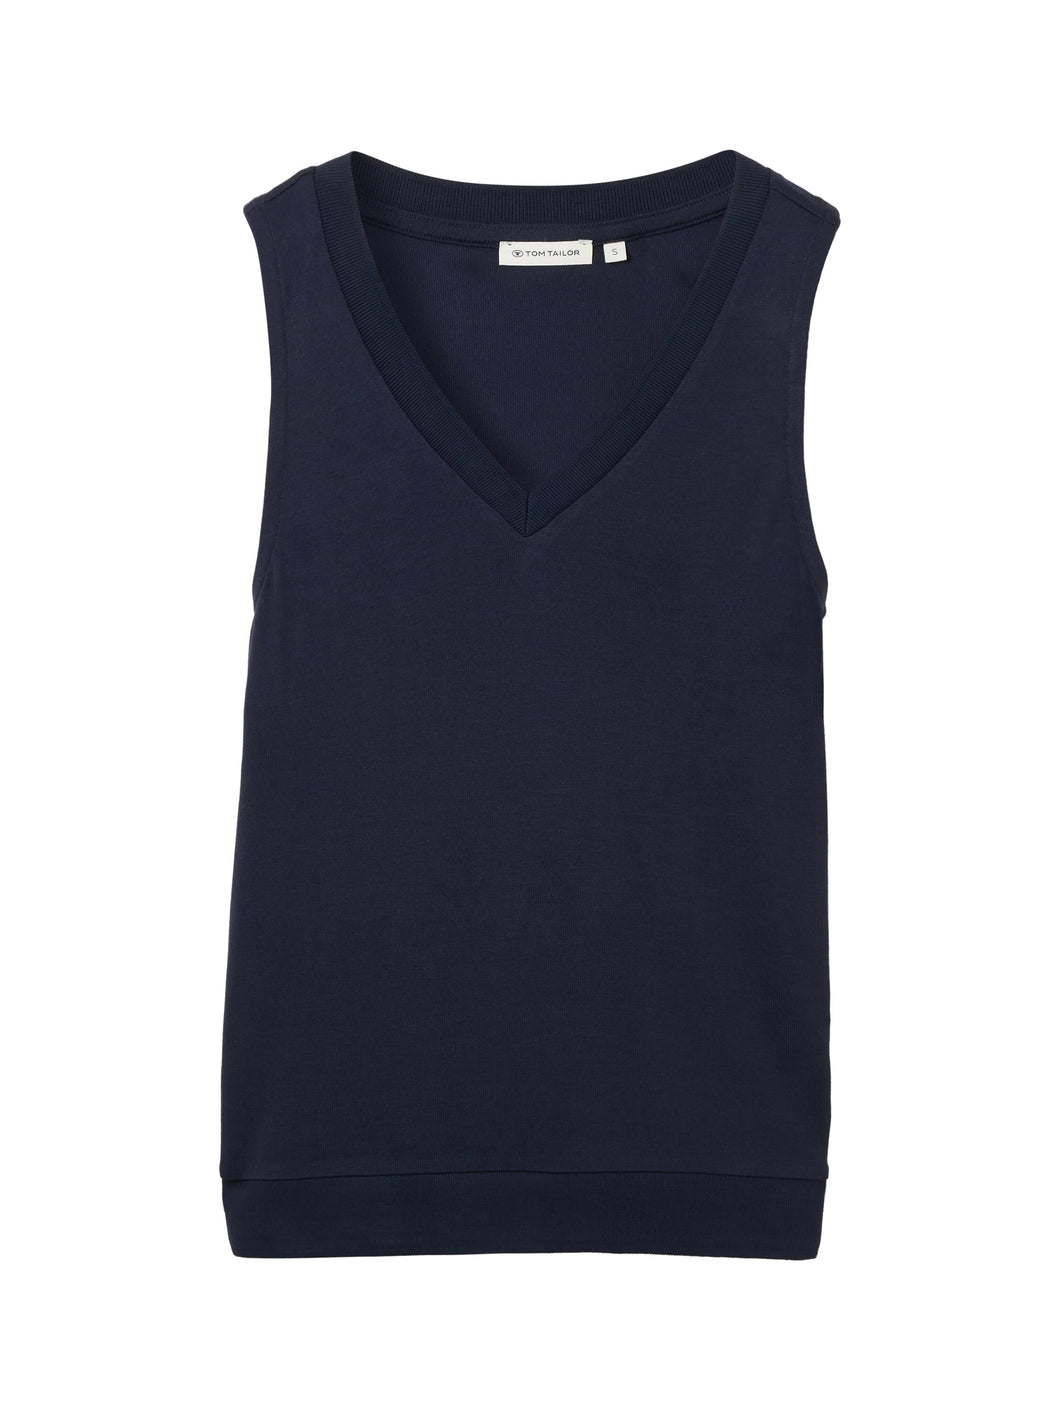 TOM TAILOR T-SHIRT TOP WITH RIB DETAILS sky captain blue